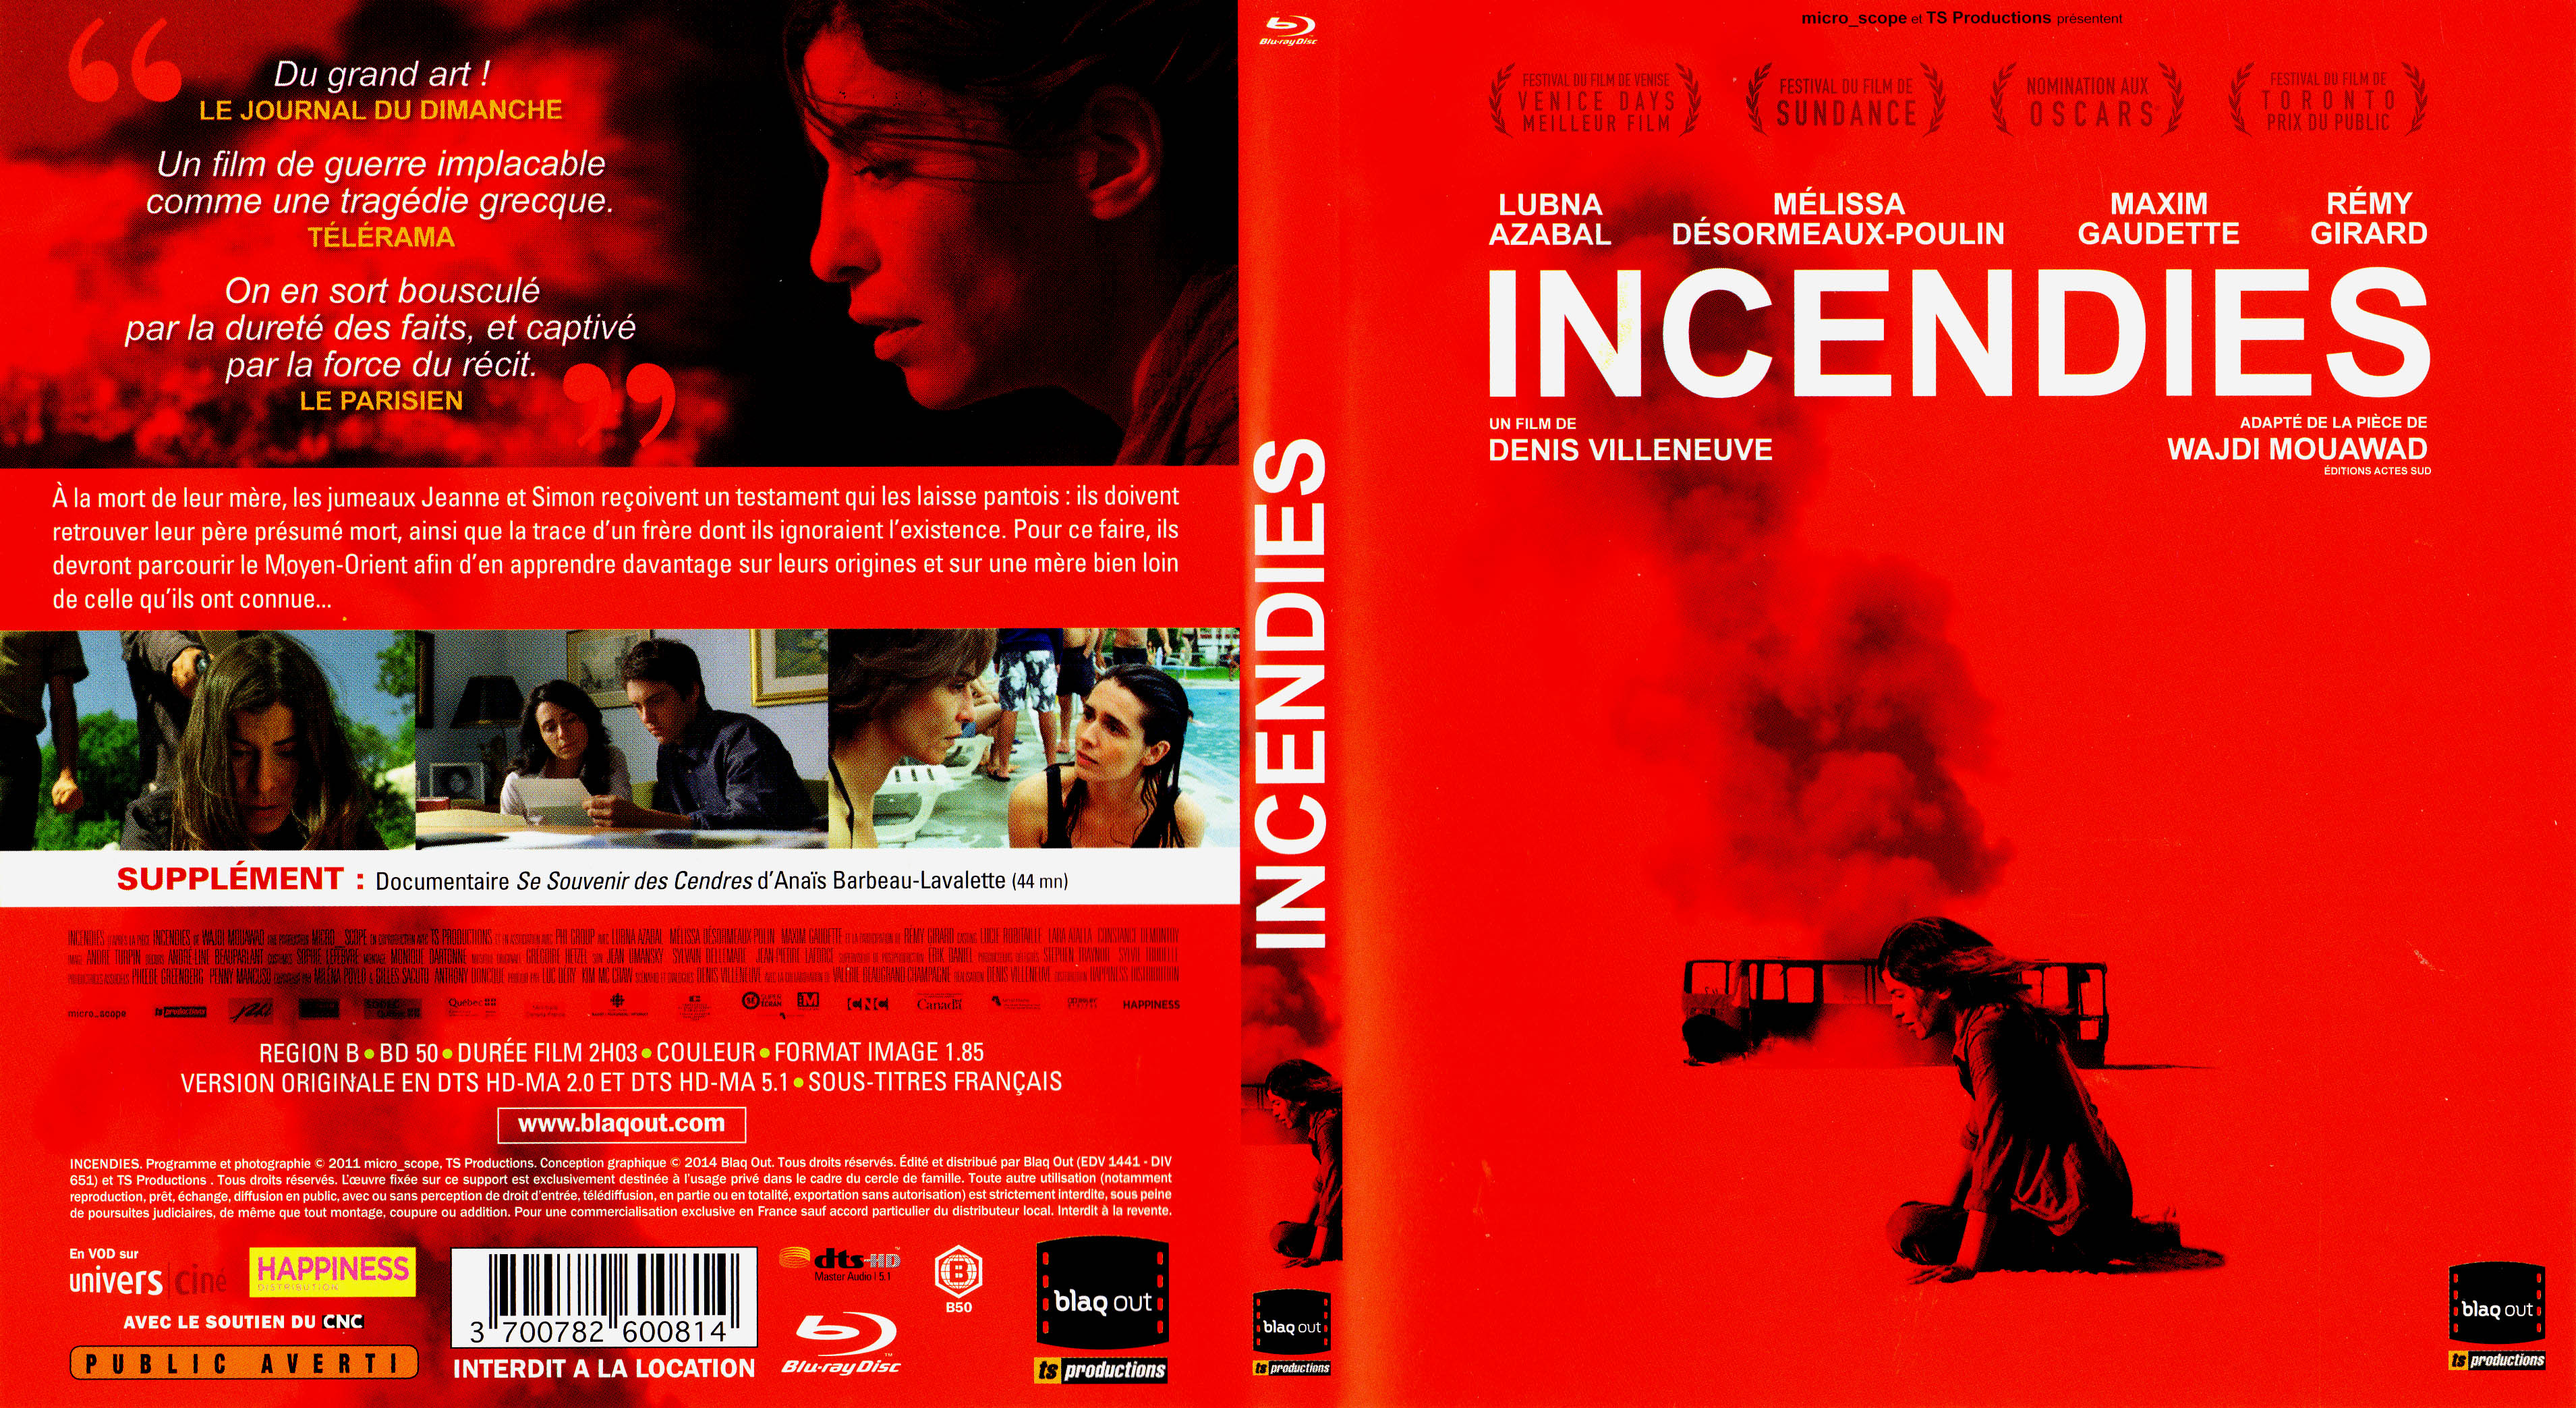 Jaquette DVD Incendies (BLU-RAY)